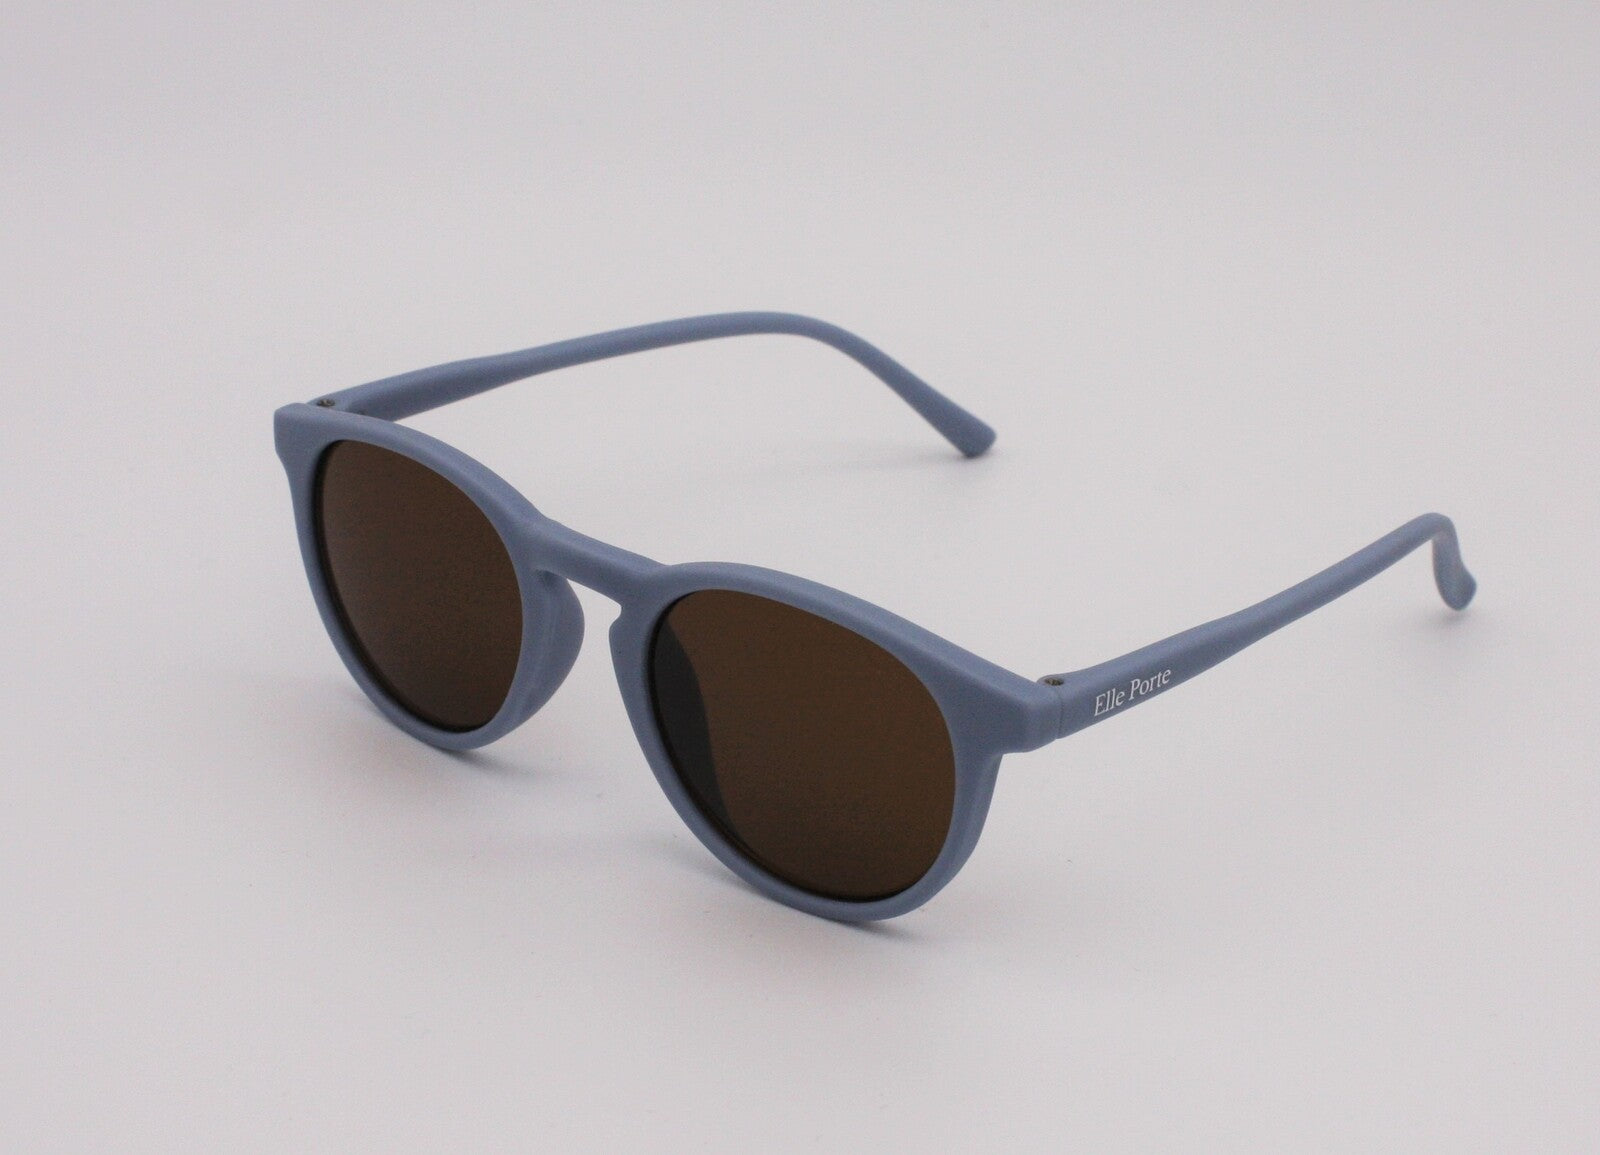 Side view of blue childrens sunglasses